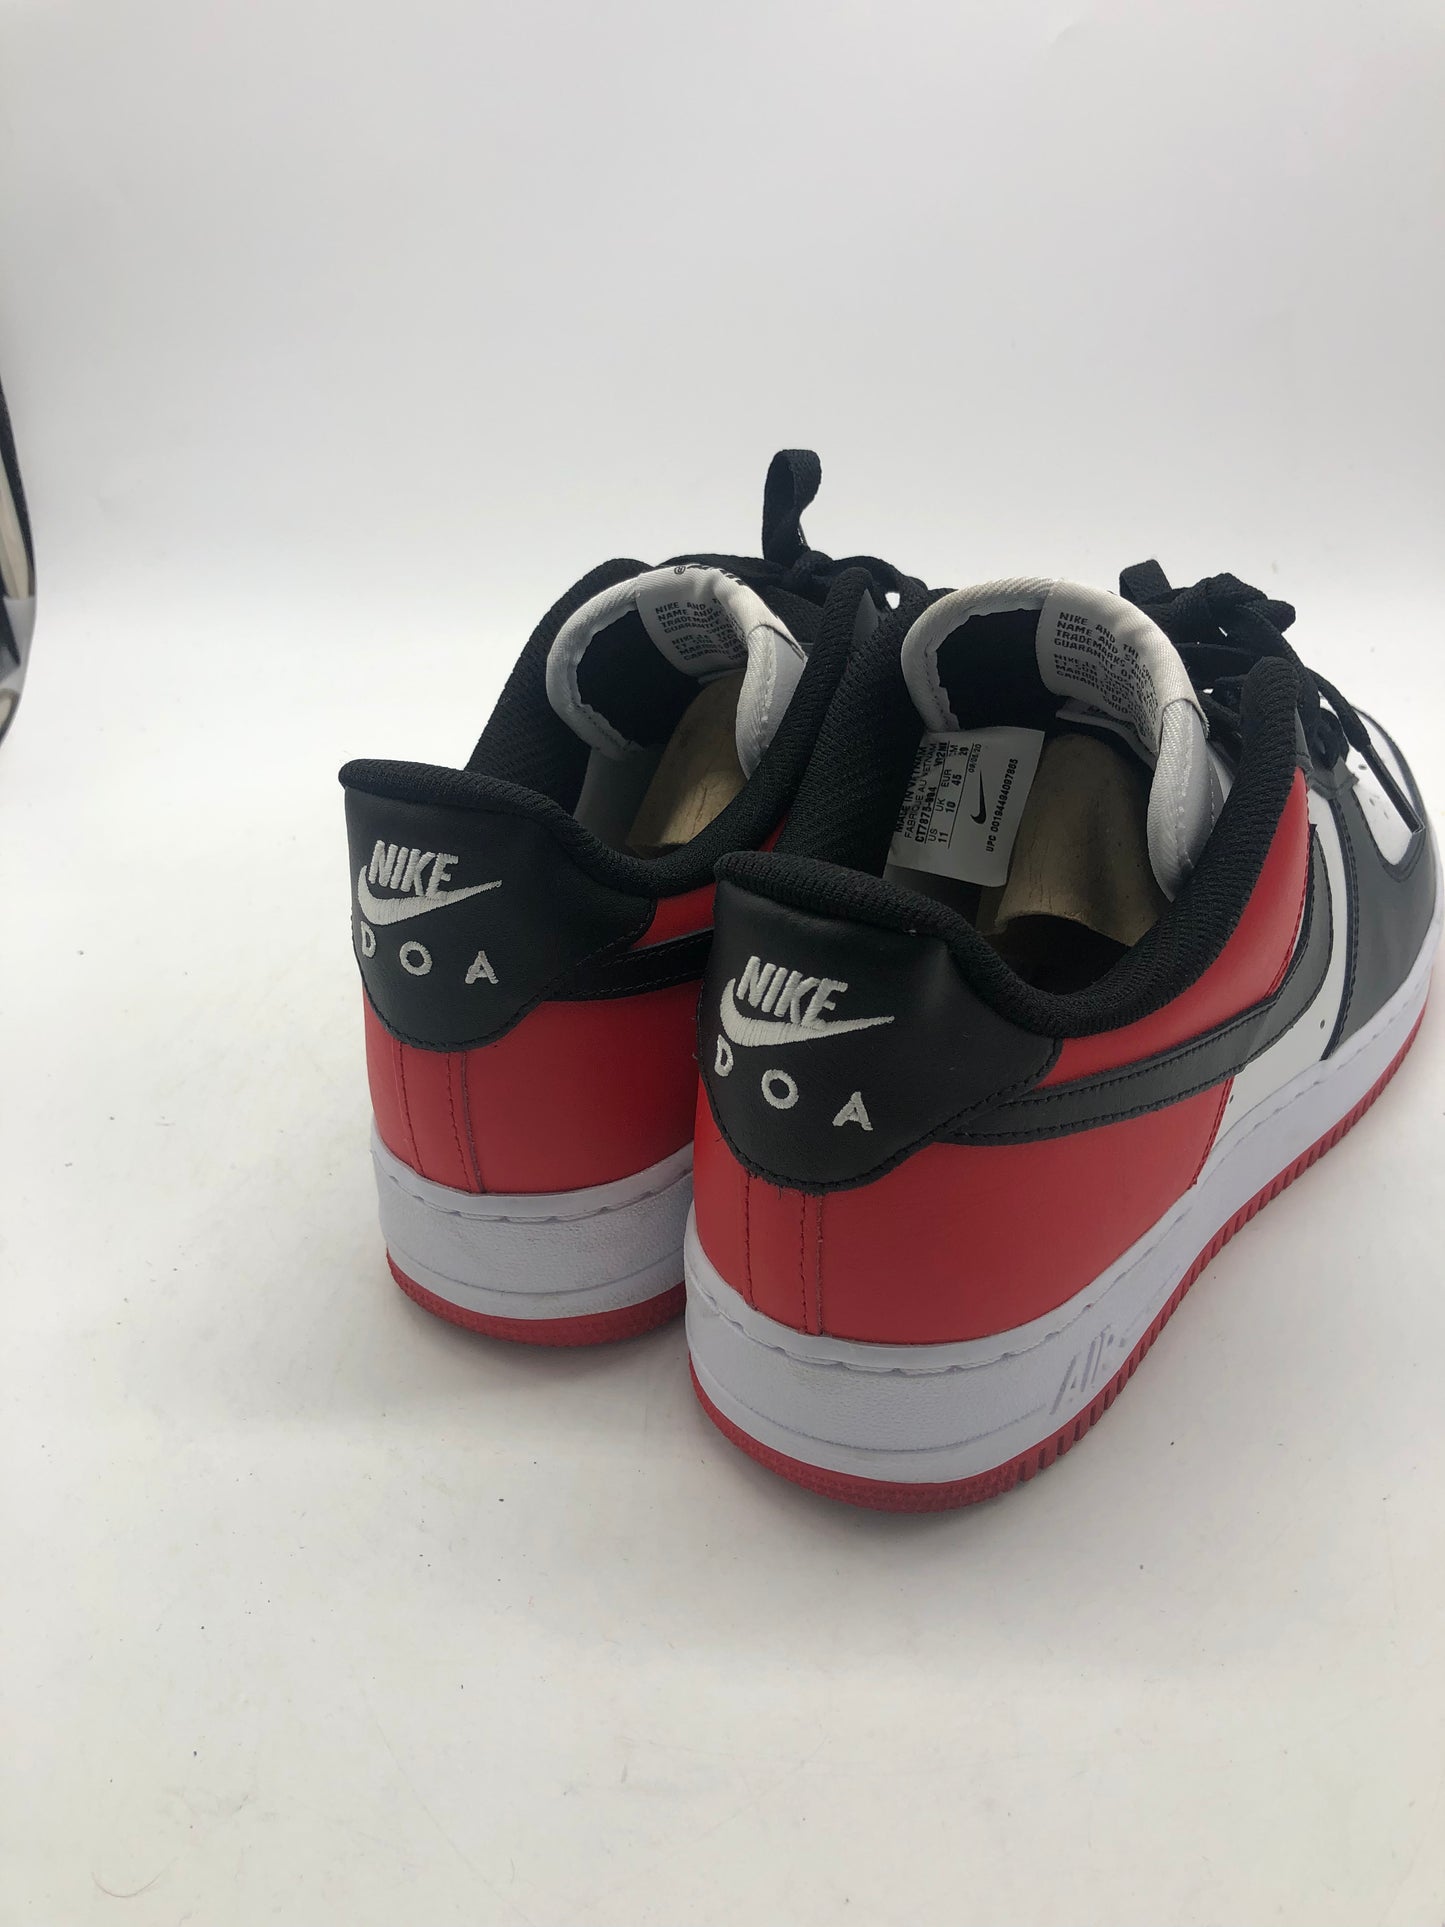 Load image into Gallery viewer, Preowned Nike Air Force 1 Nike ID DOA Black Toe Sz 11M/12.5W
